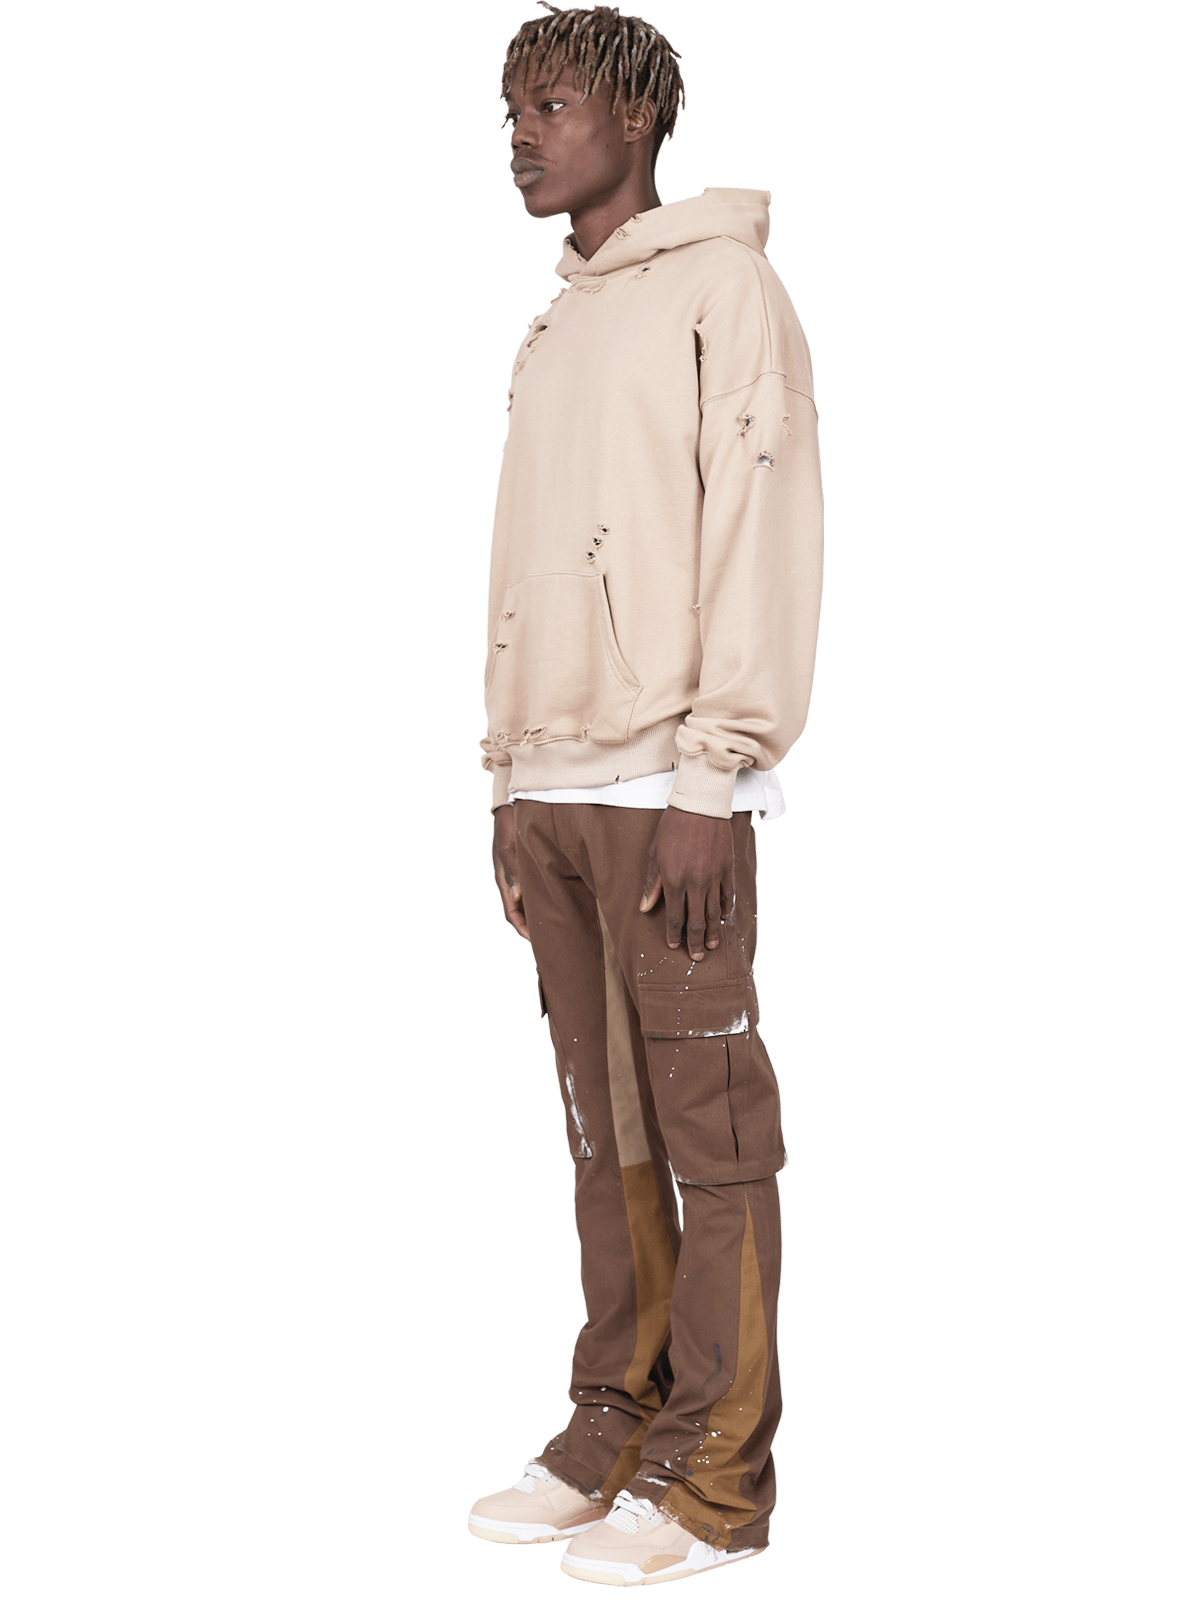 Flare Cargo Pants - Tobacco